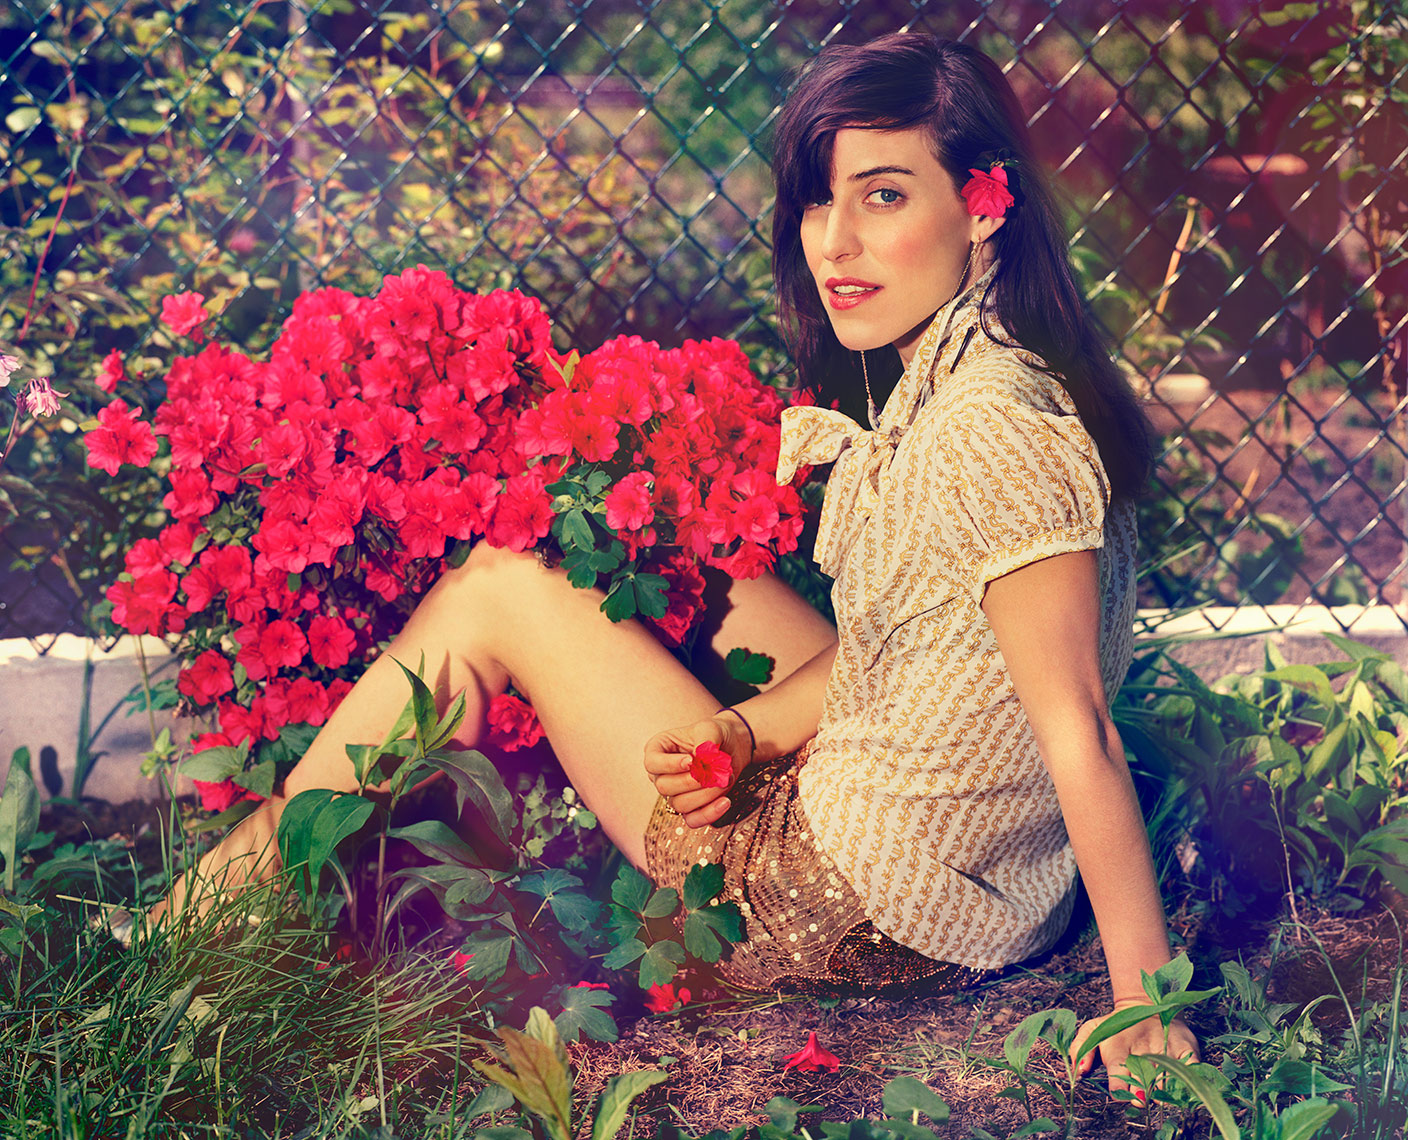 Feist for Interscope Records